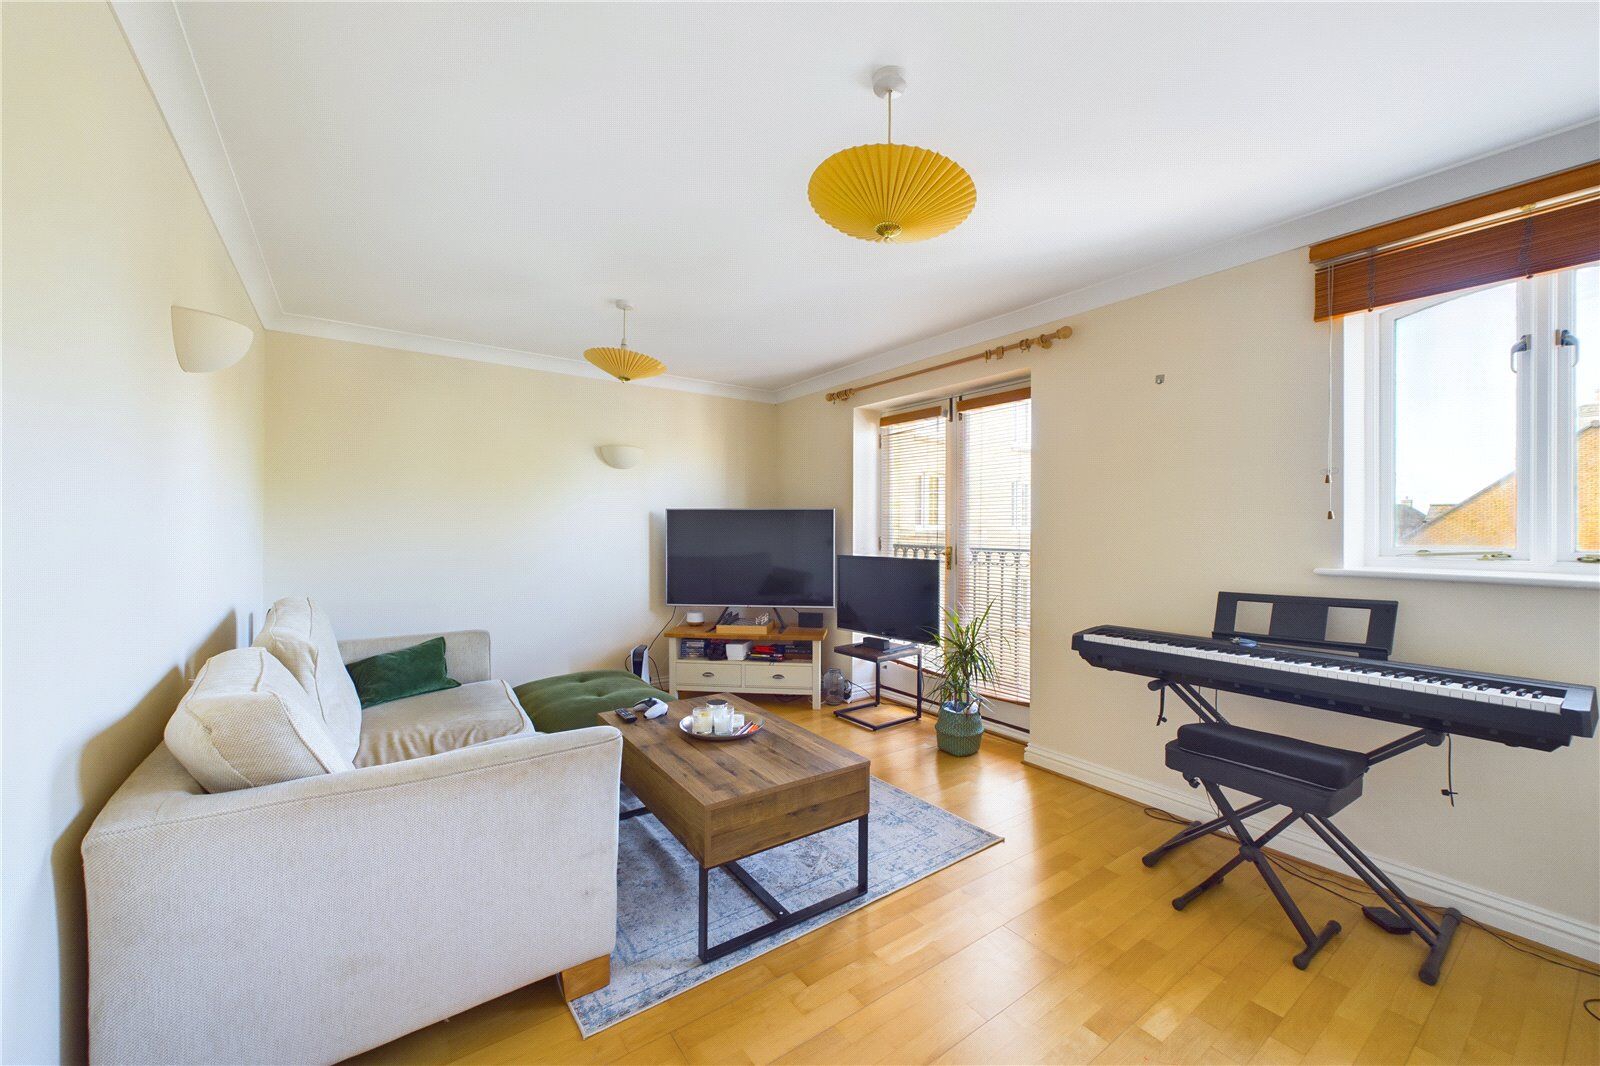 2 bedroom  flat for sale London Road, St. Ives, PE27, main image